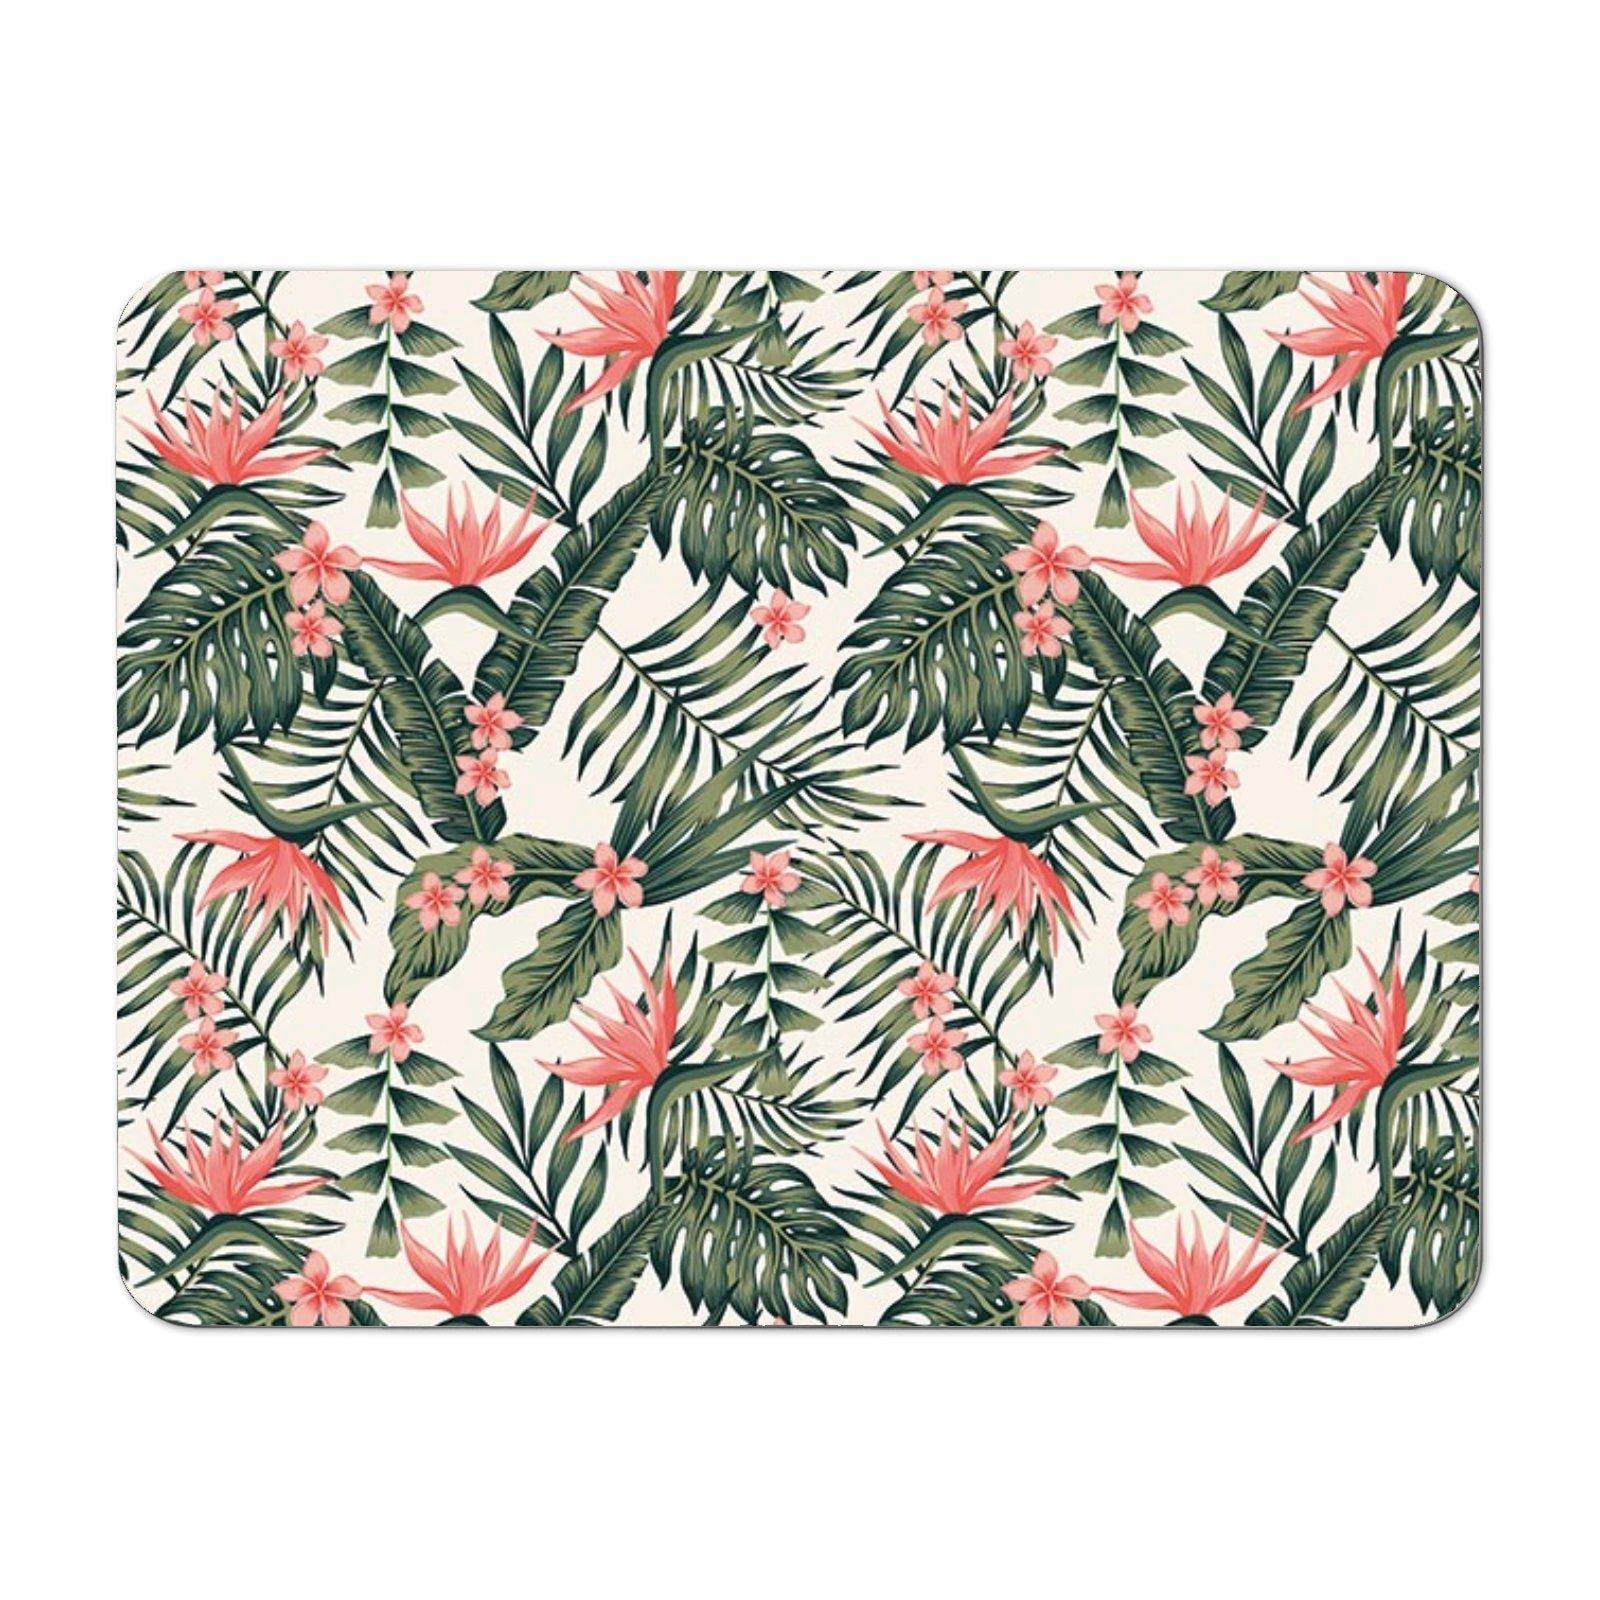 Dark Tropical Green Leaves Placemats